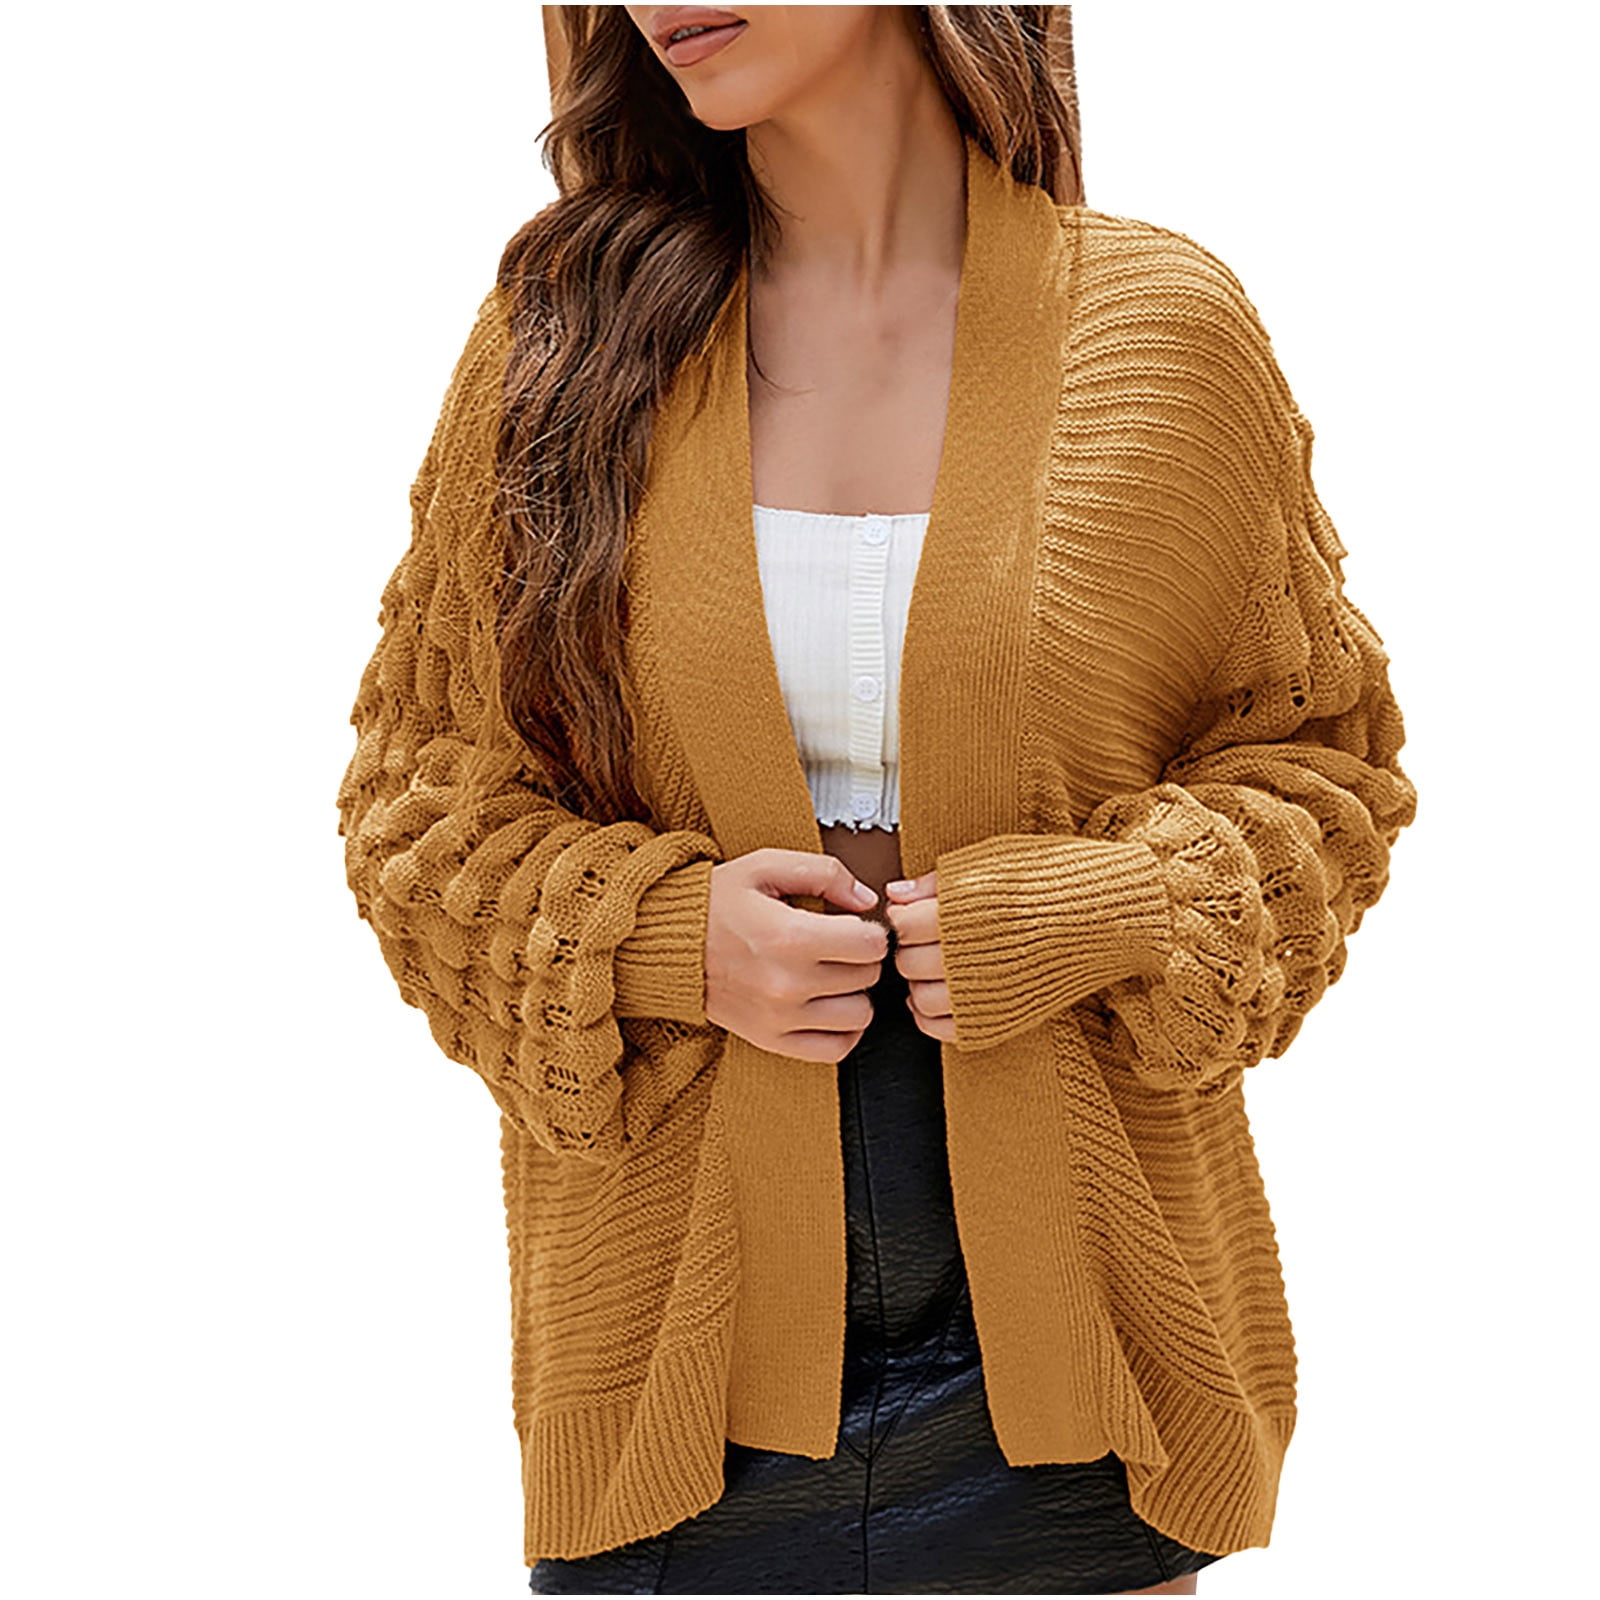 Womens Casual Long Sleeve Cardigan Thin Solid Sweater Coat Outwear Tops Blouse 